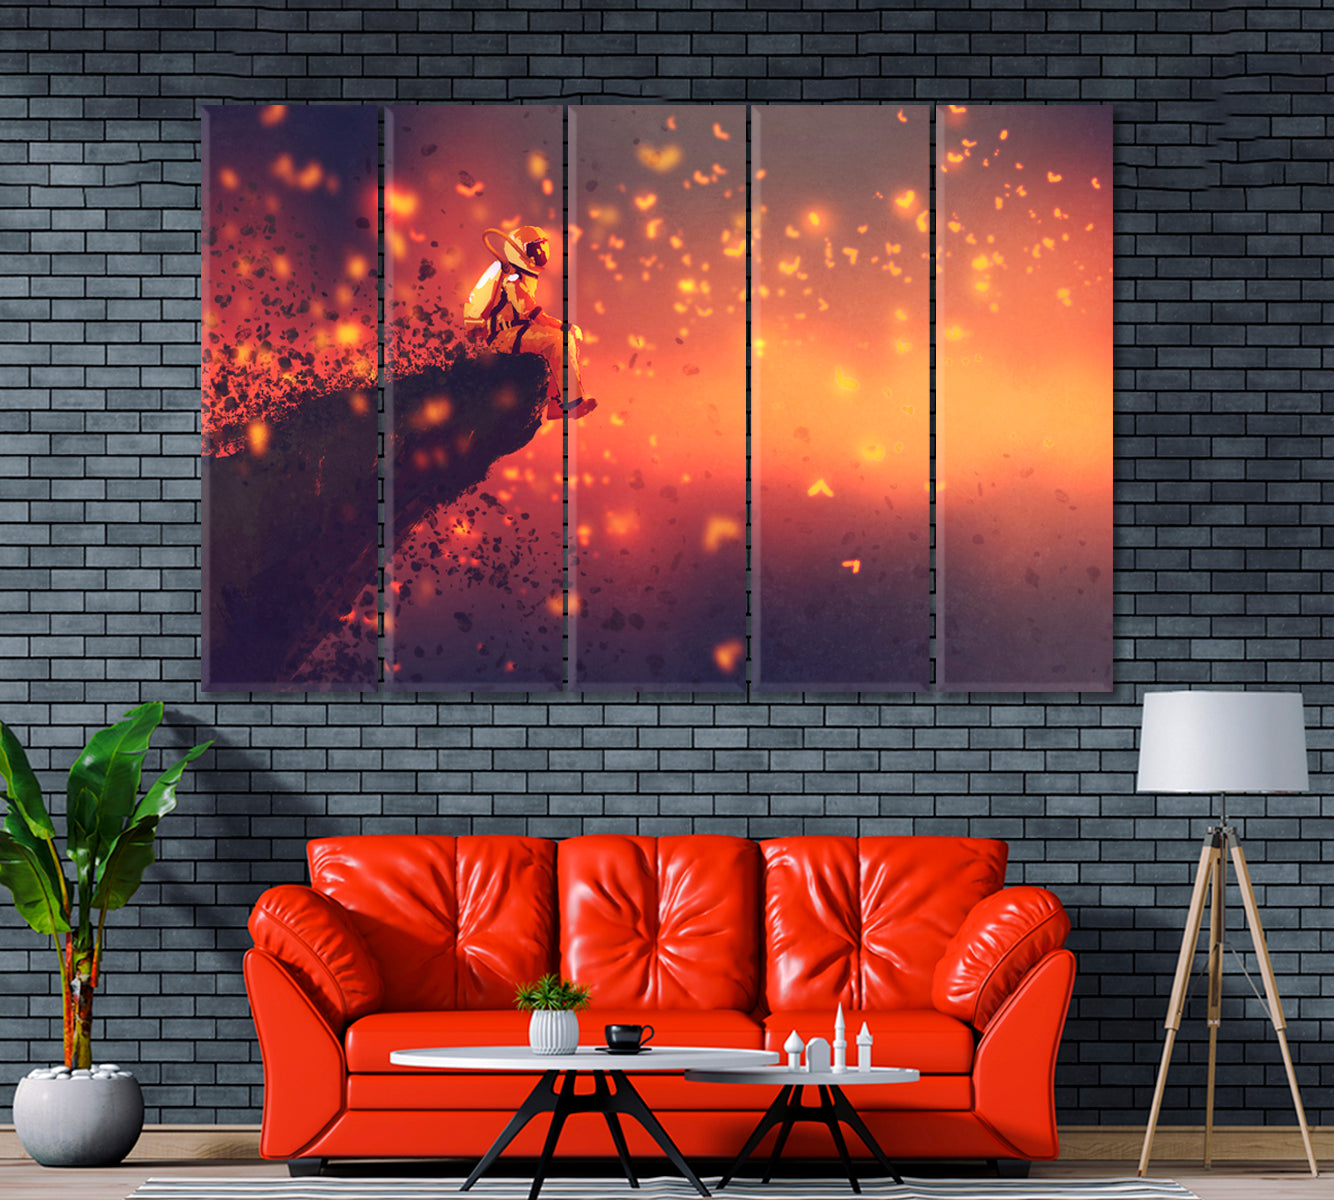 Astronaut Looking at Fireflies Canvas Print ArtLexy 5 Panels 36"x24" inches 